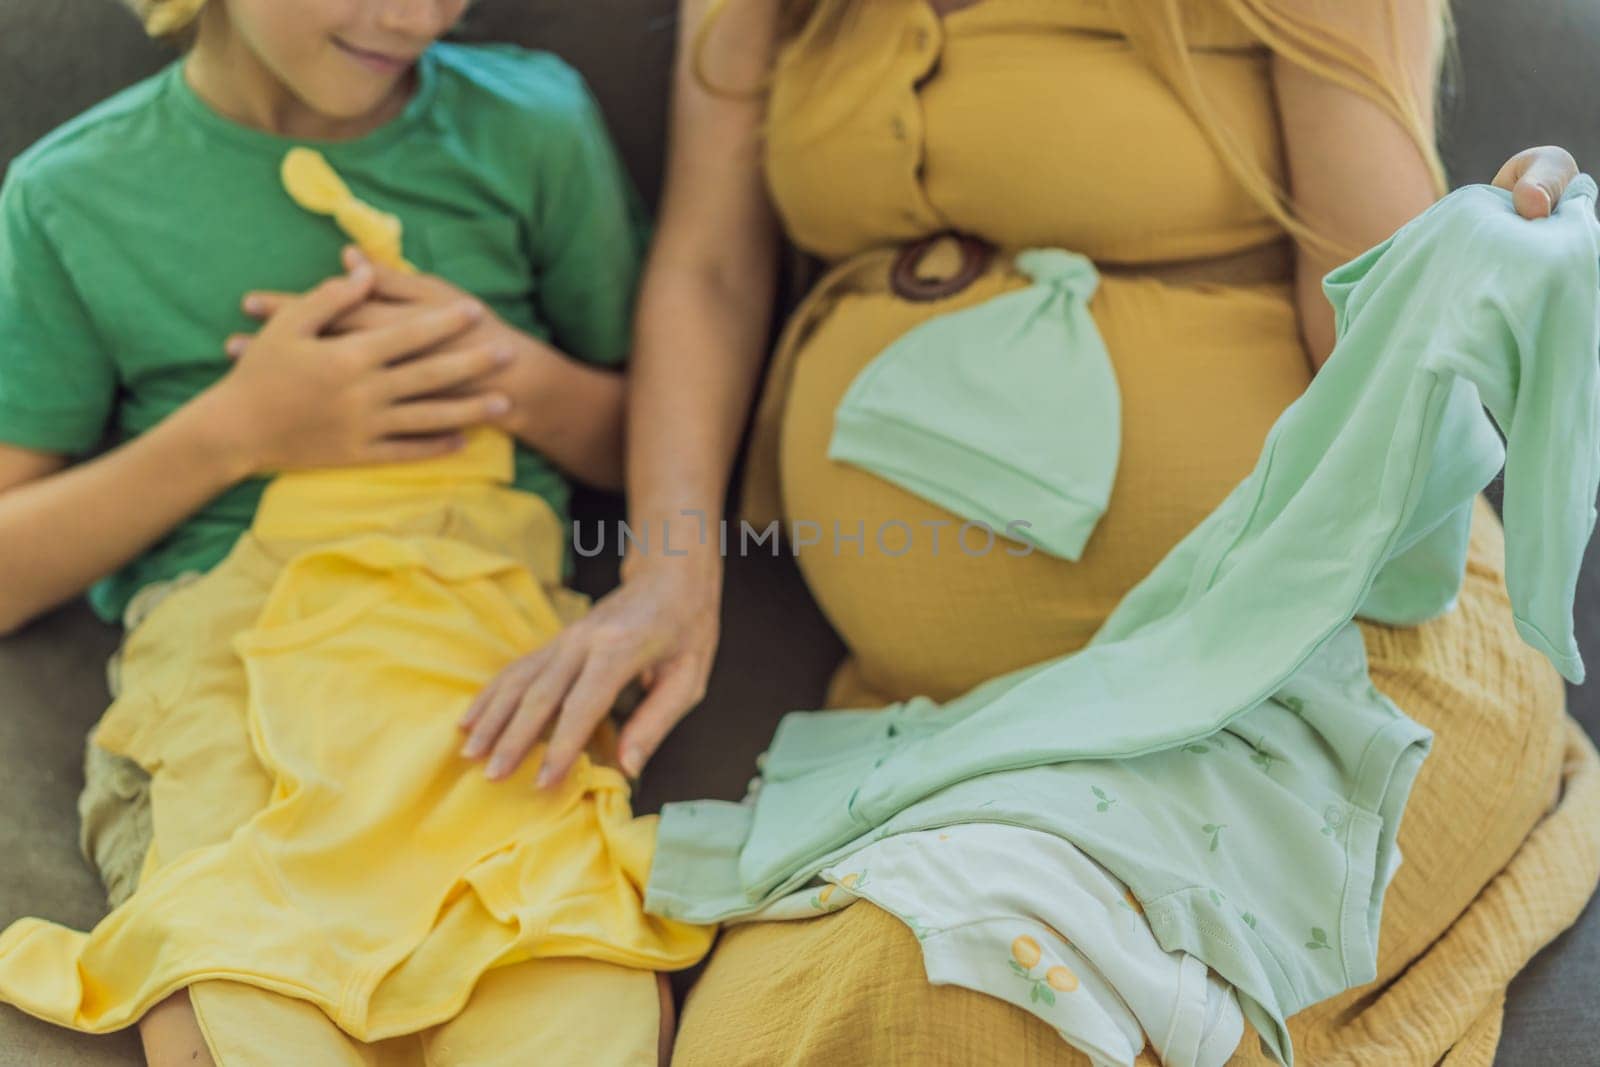 Heartwarming family moment as expectant mom and son joyfully browse through newborn baby's clothes, eagerly anticipating the arrival of a new family member by galitskaya